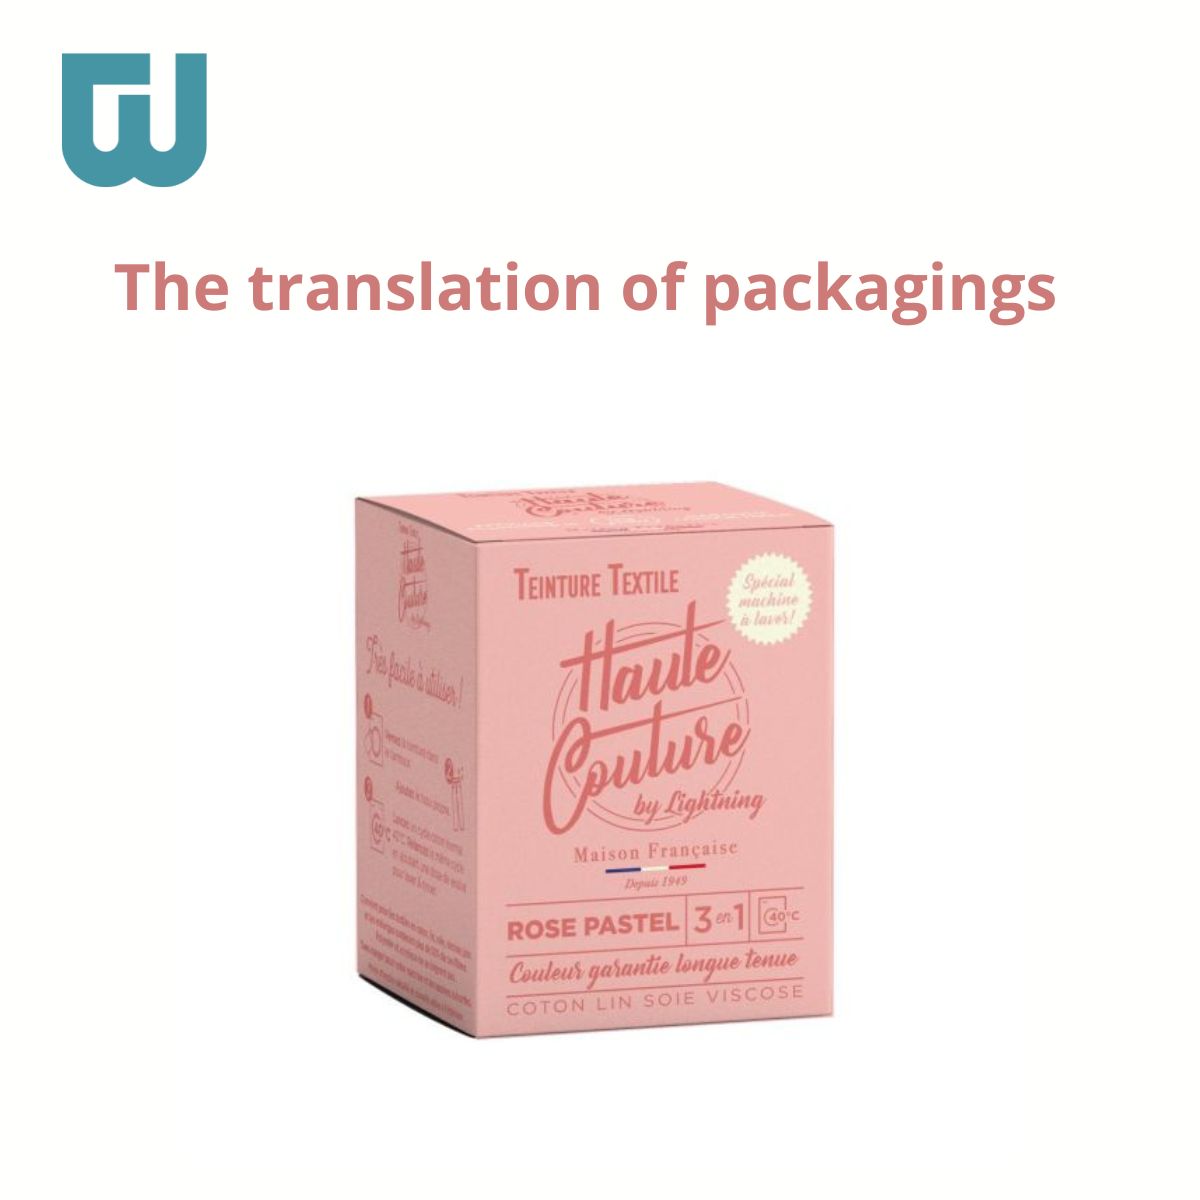 the translation of packagings